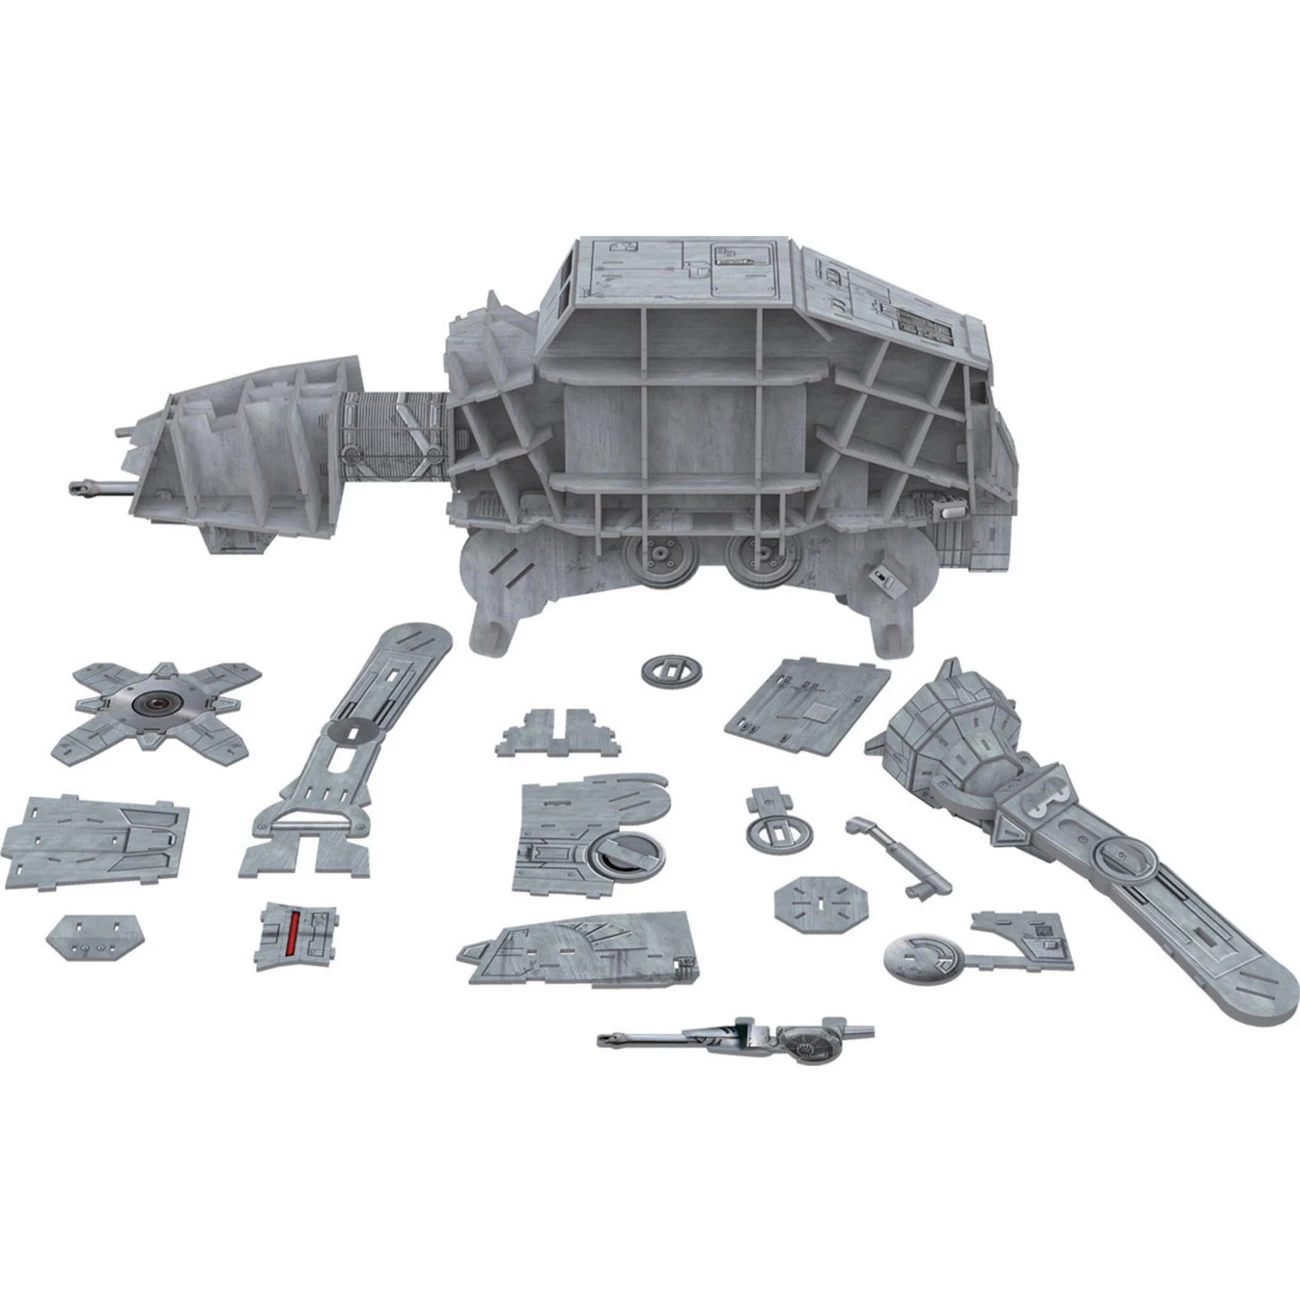 Revell 00322 - Star Wars Imperial AT-AT - 3D Puzzle